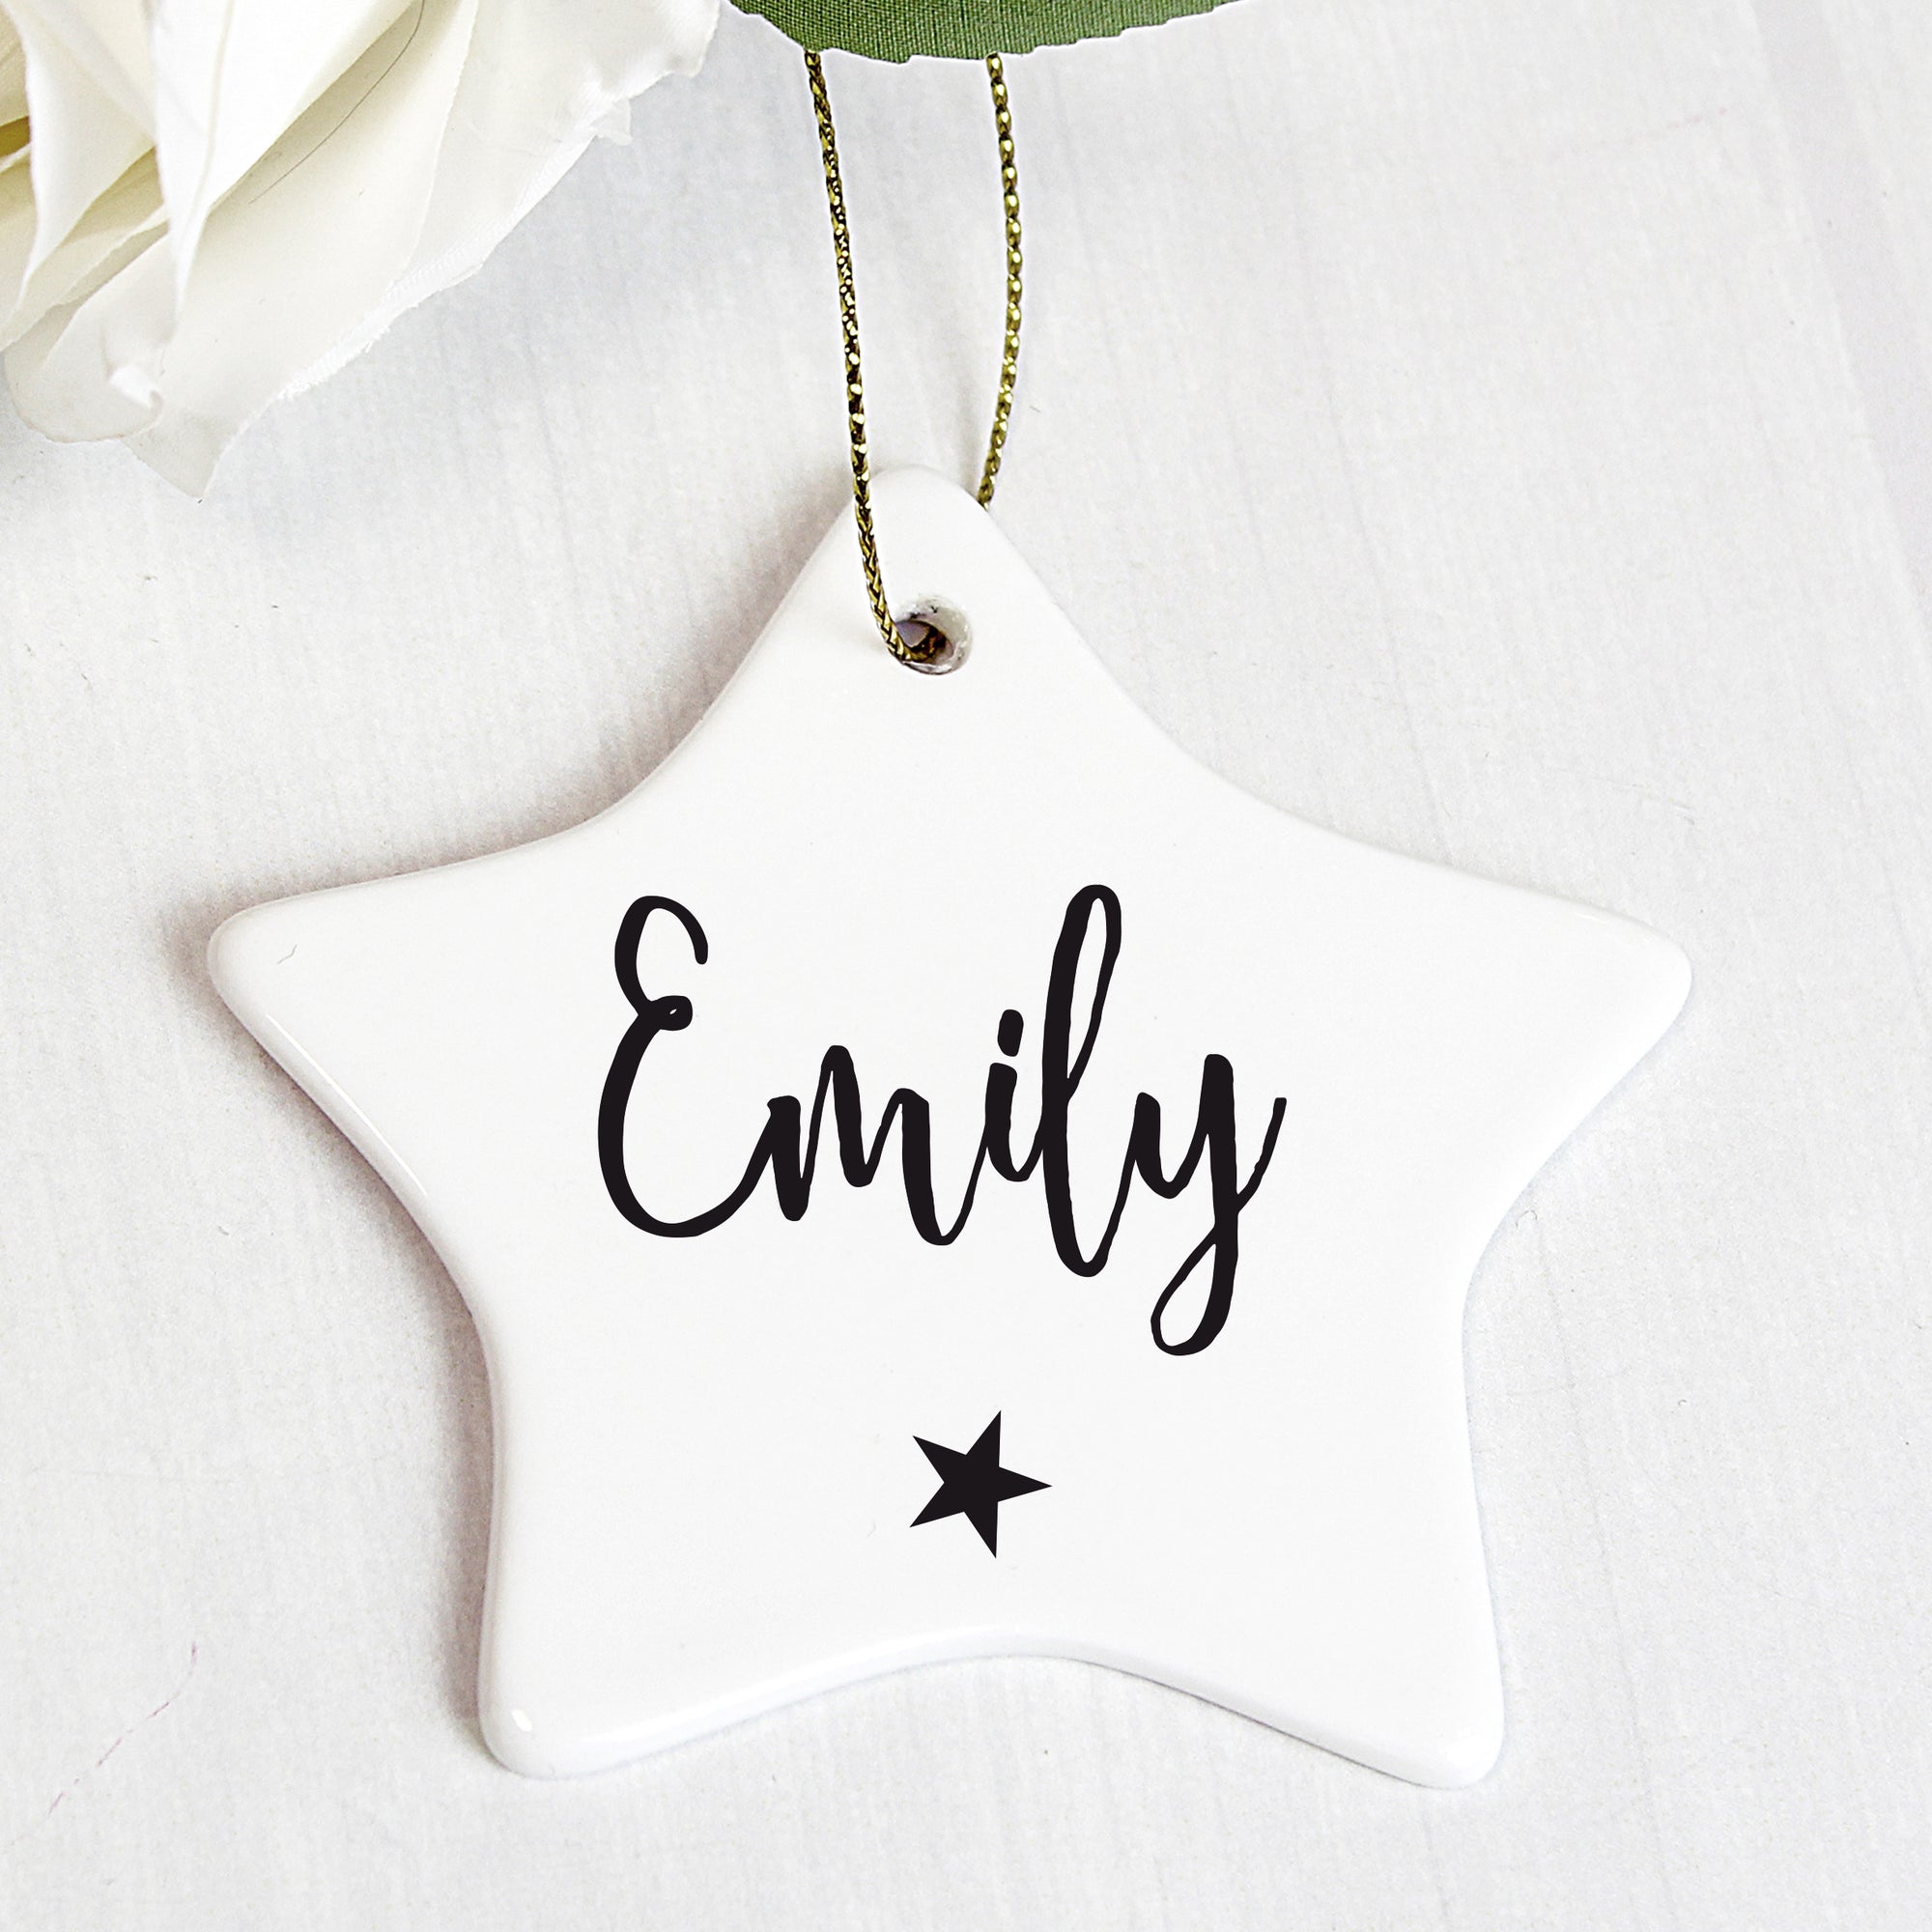 Personalised white ceramic star shaped Christmas decoration that comes with a string ready to hang. The front of the decoration can be personalised with a name of up to 12 characters which will be printed in a black modern hand written style font and there is a small black star printed below the name.